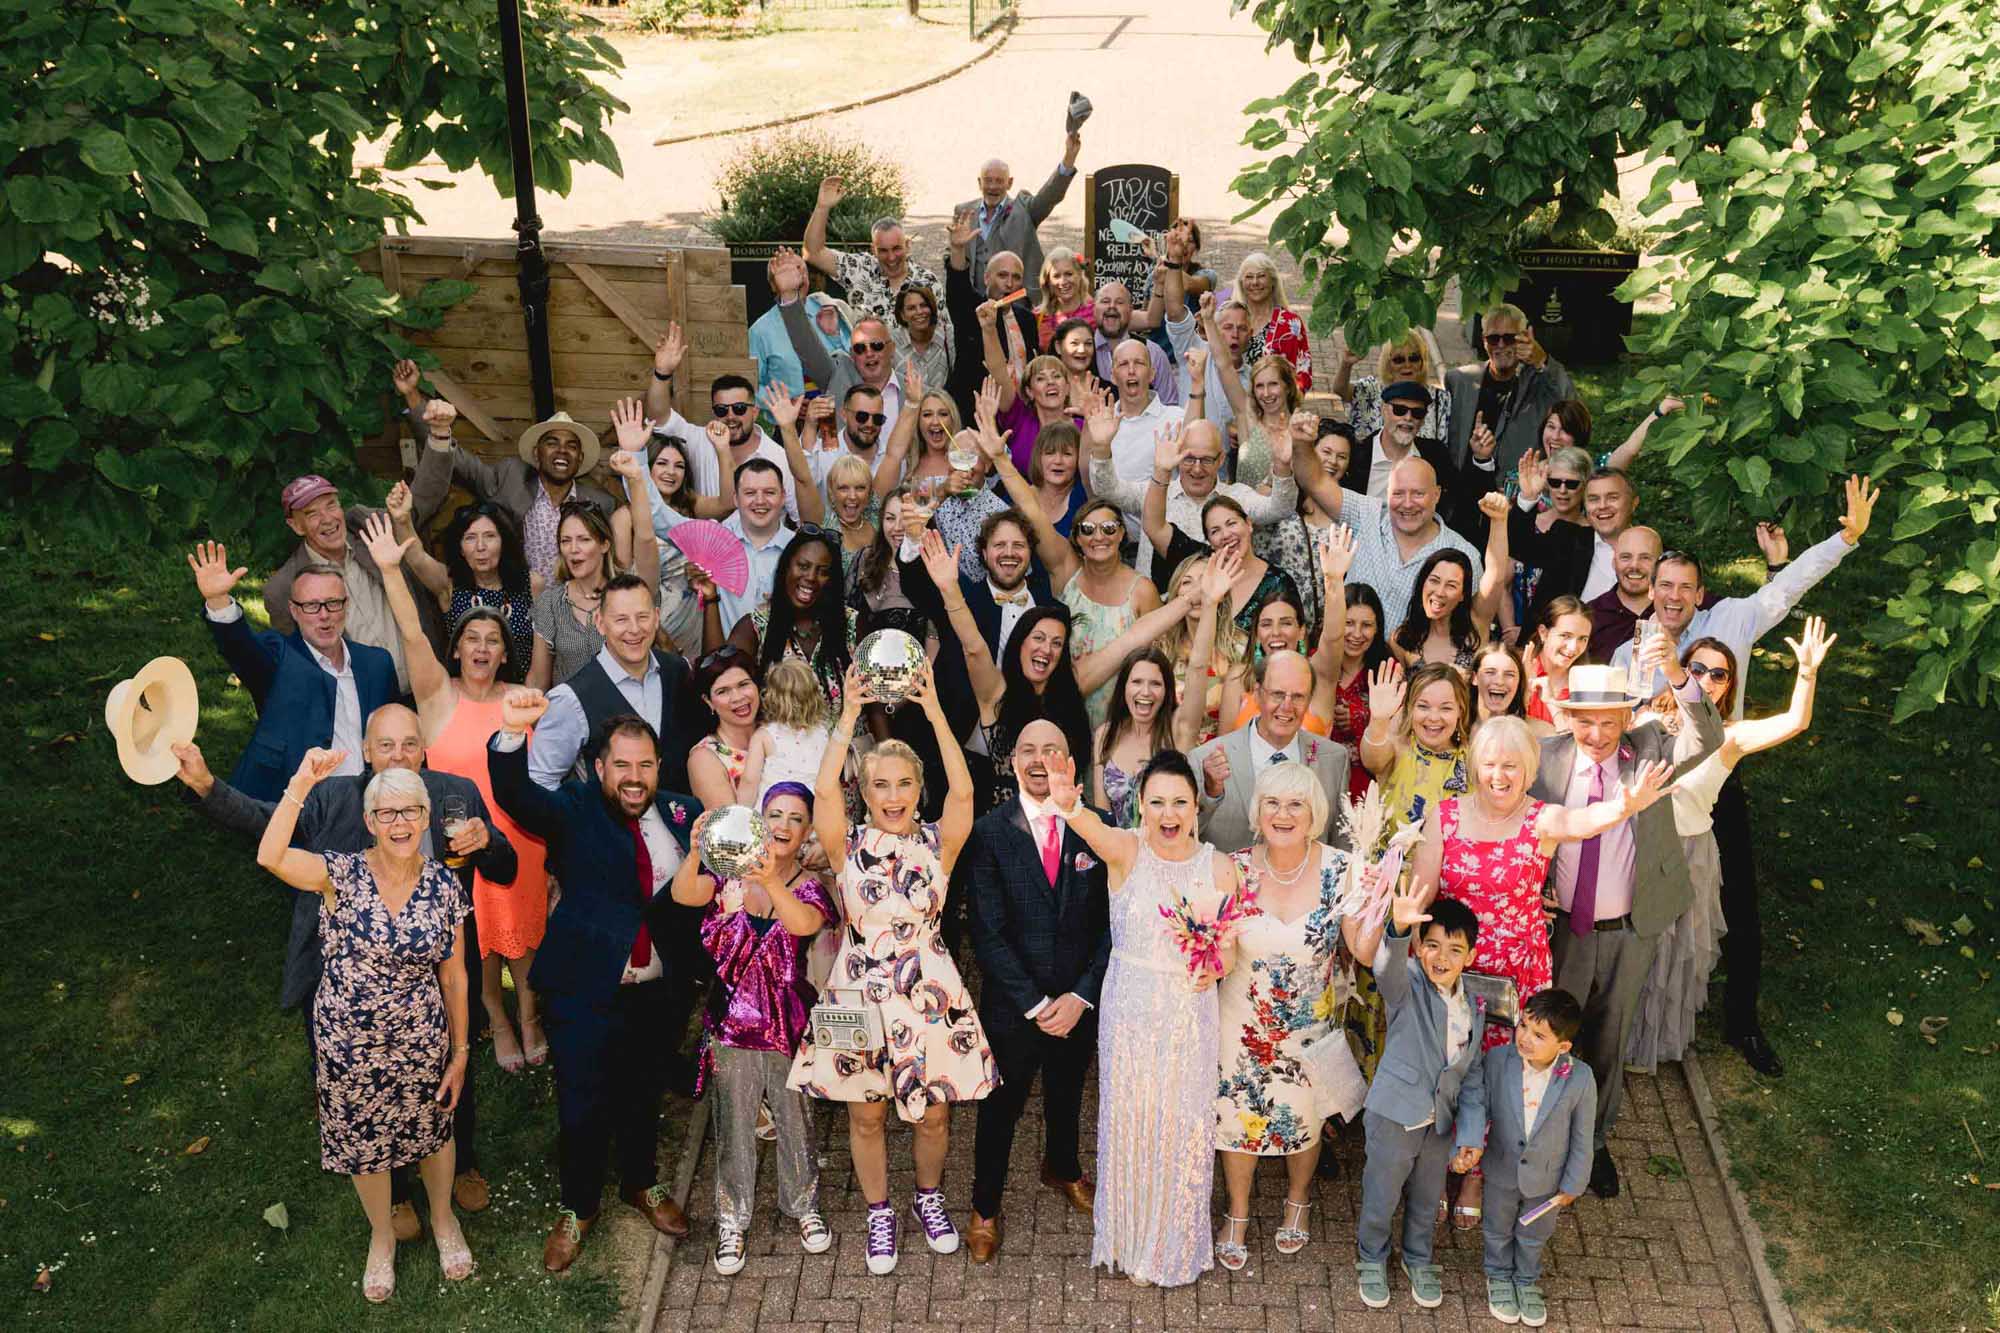 All the wedding guests at Palm Court Pavilion in Worthing, West Sussex.